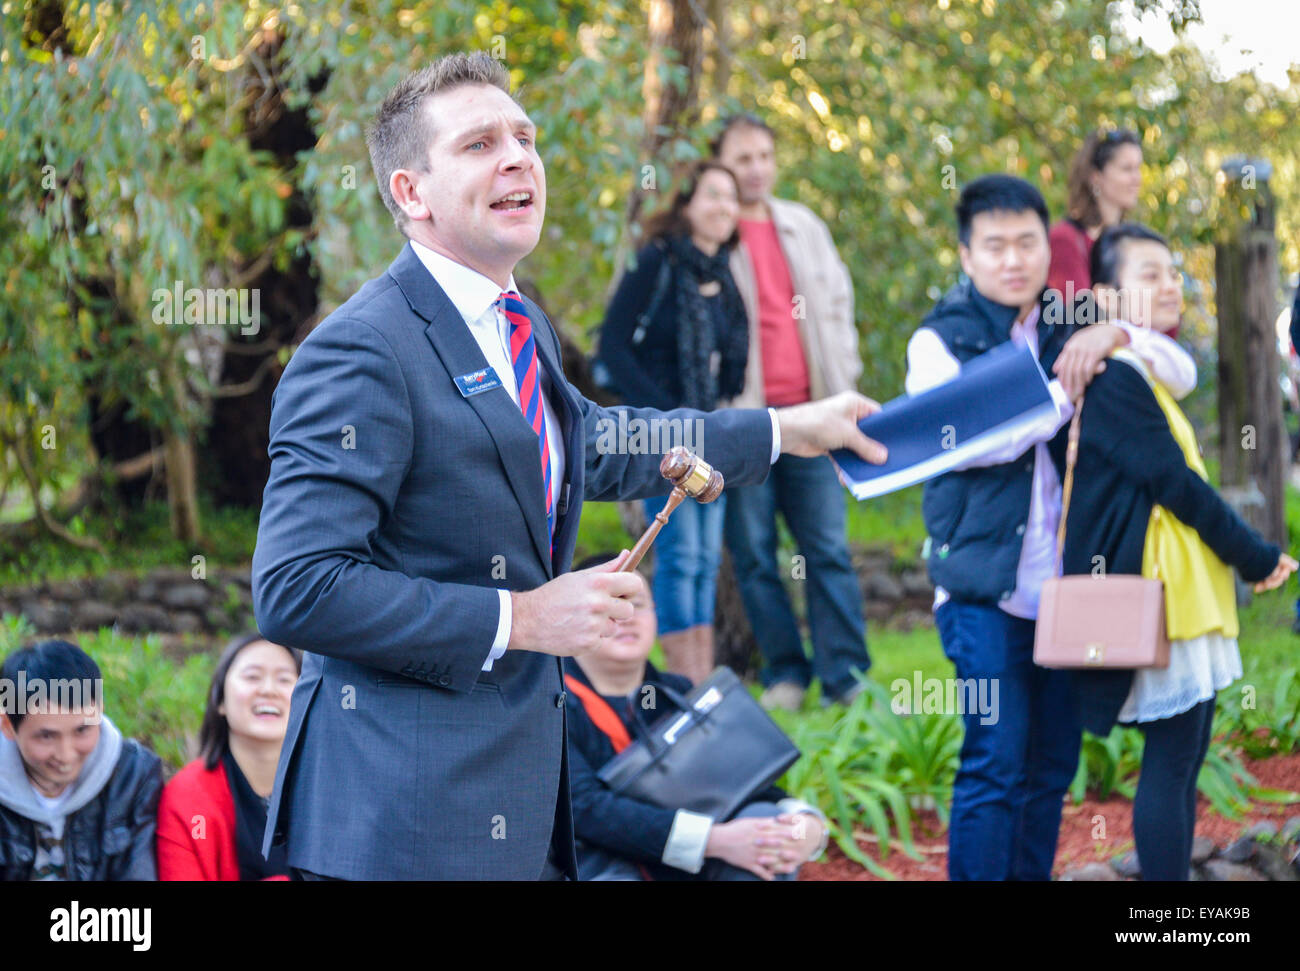 Auctioneer with gabble selling property with chinese, asians and westerners bidding at the Auction Stock Photo